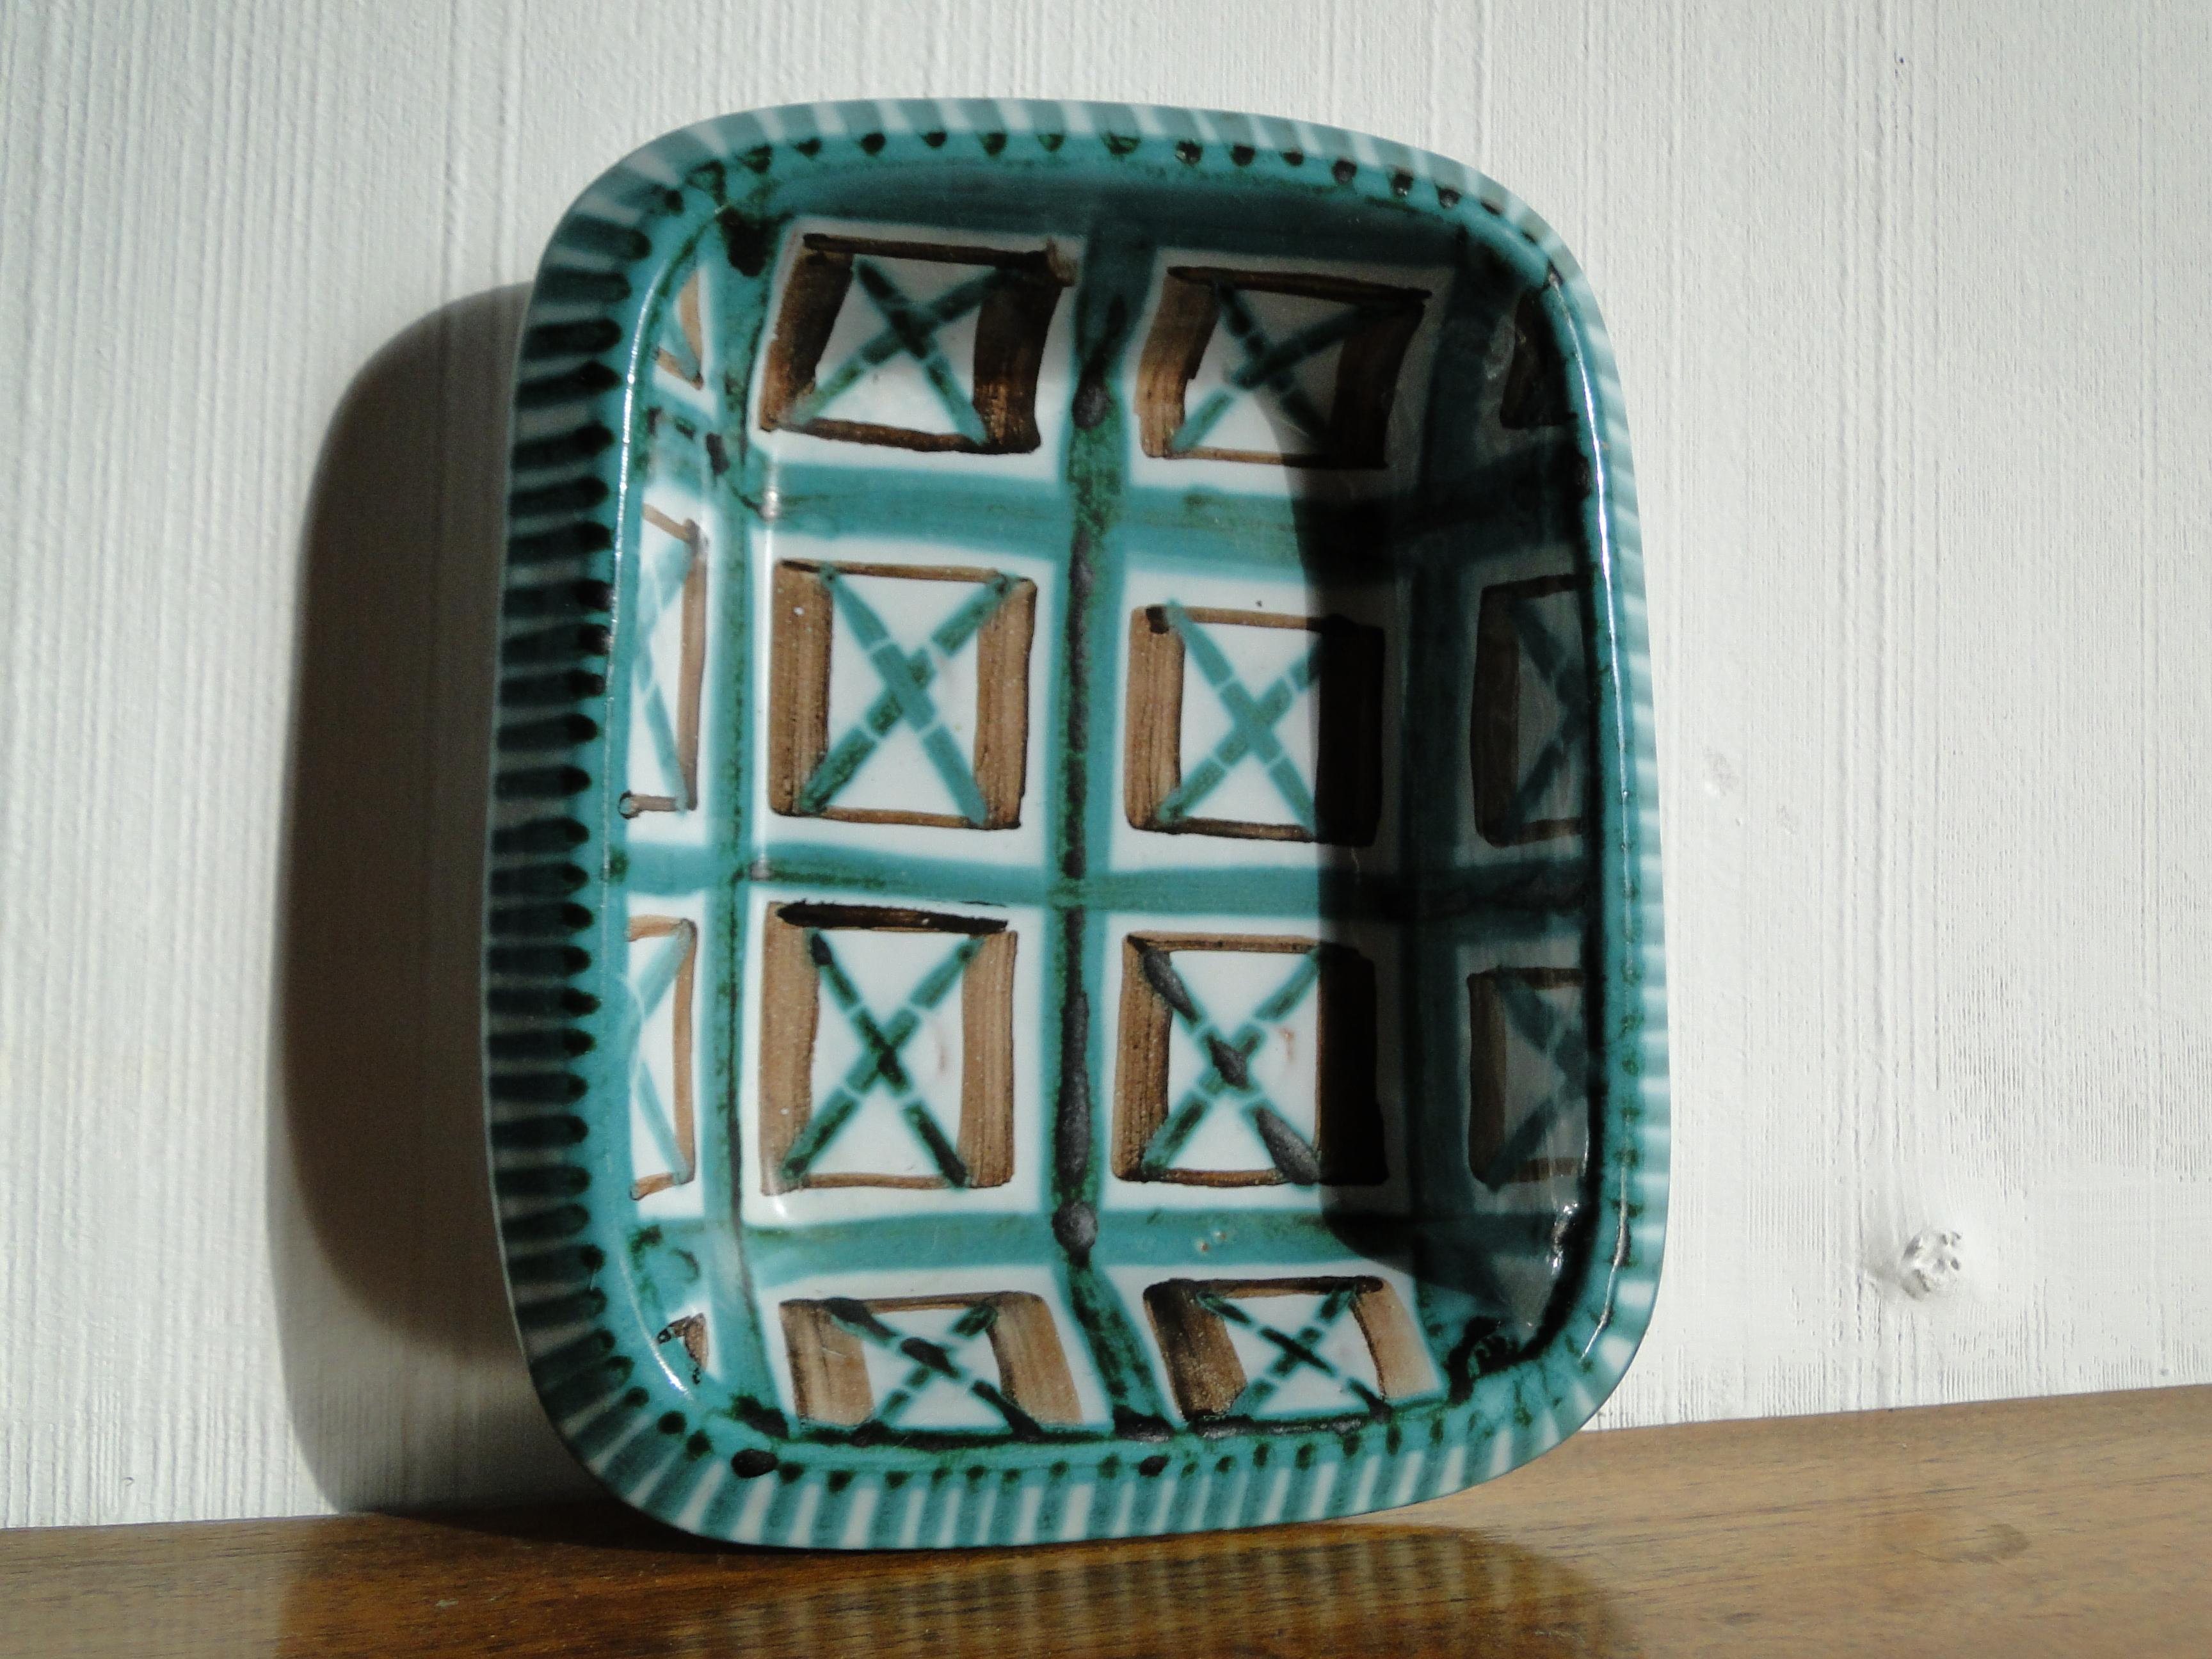 Robert Picault (1919 - 2000)
French ceramist in Vallauris

Robert Picault has contributed to the revival of culinary ceramics by updating traditional local forms decorated with lines and geometric designs.

His identity style has been a great